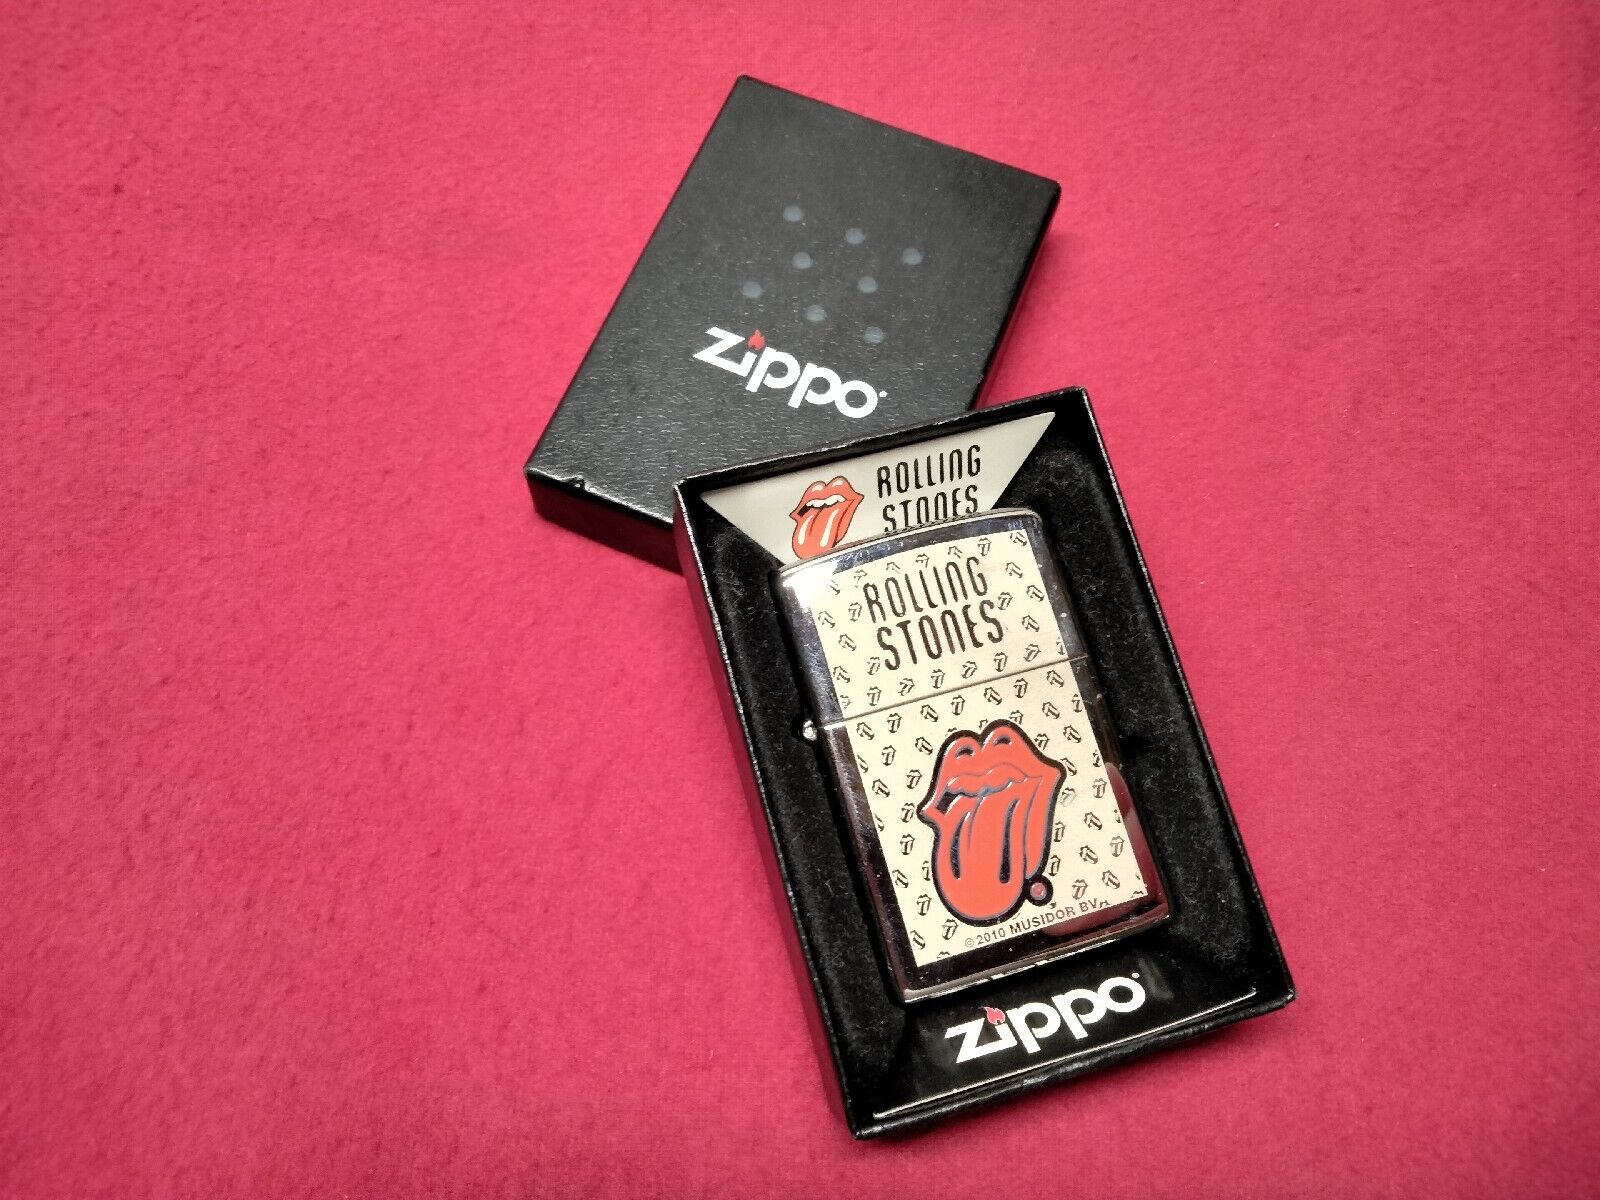 NOS 2009/2010 Rolling Stones LIPS Zippo Lighter with Box/Seal ~ UNFIRED